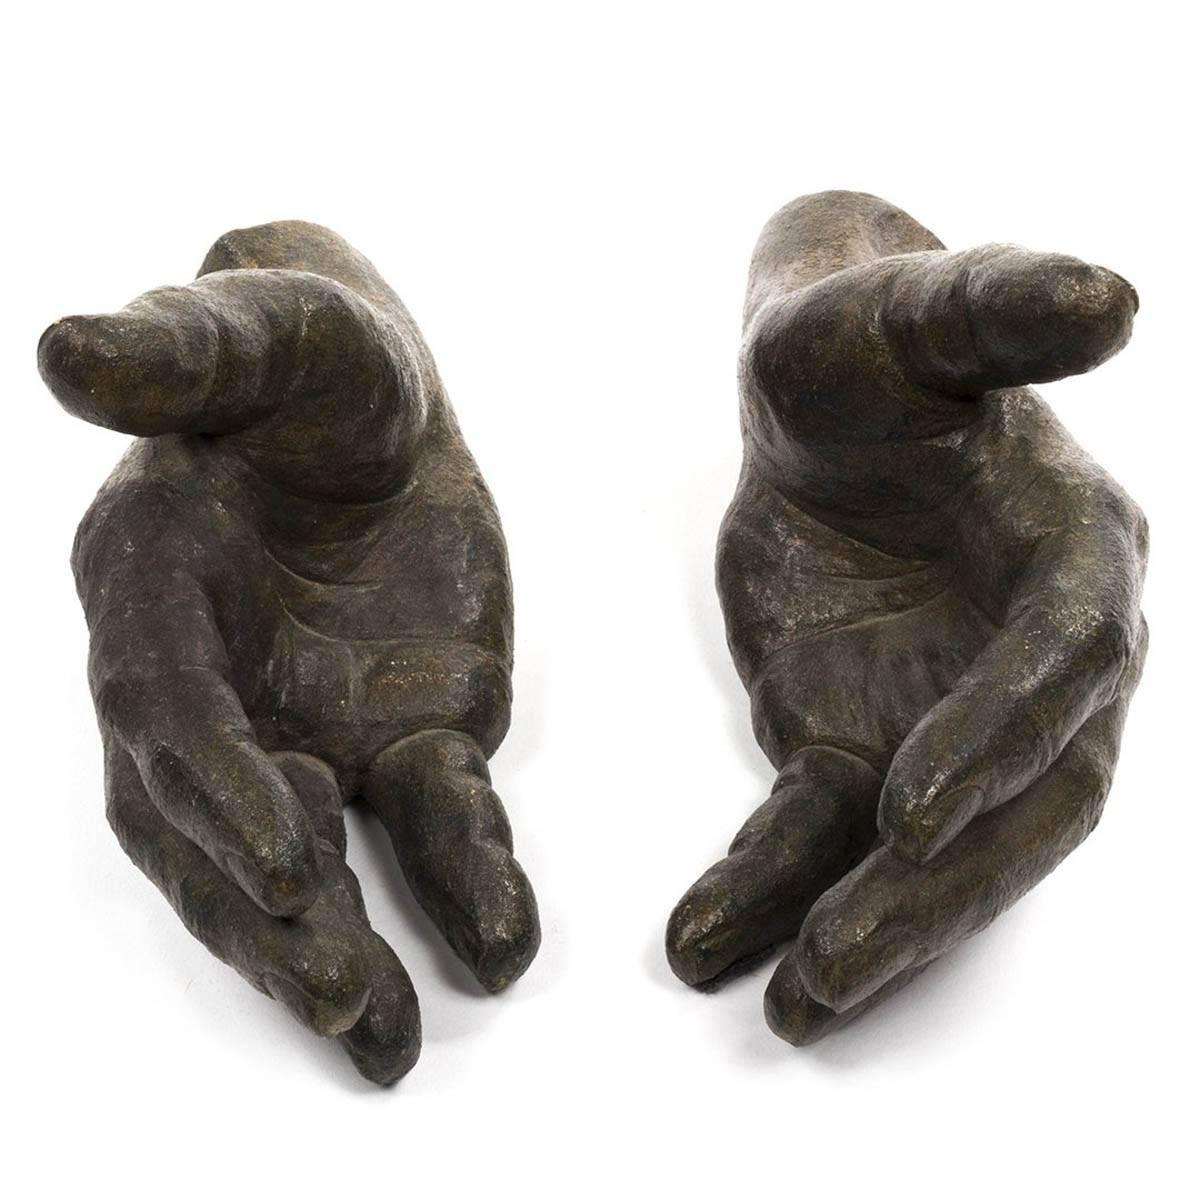 Pair of ceramic hands with bronze finish by Clara Wine, 1974.